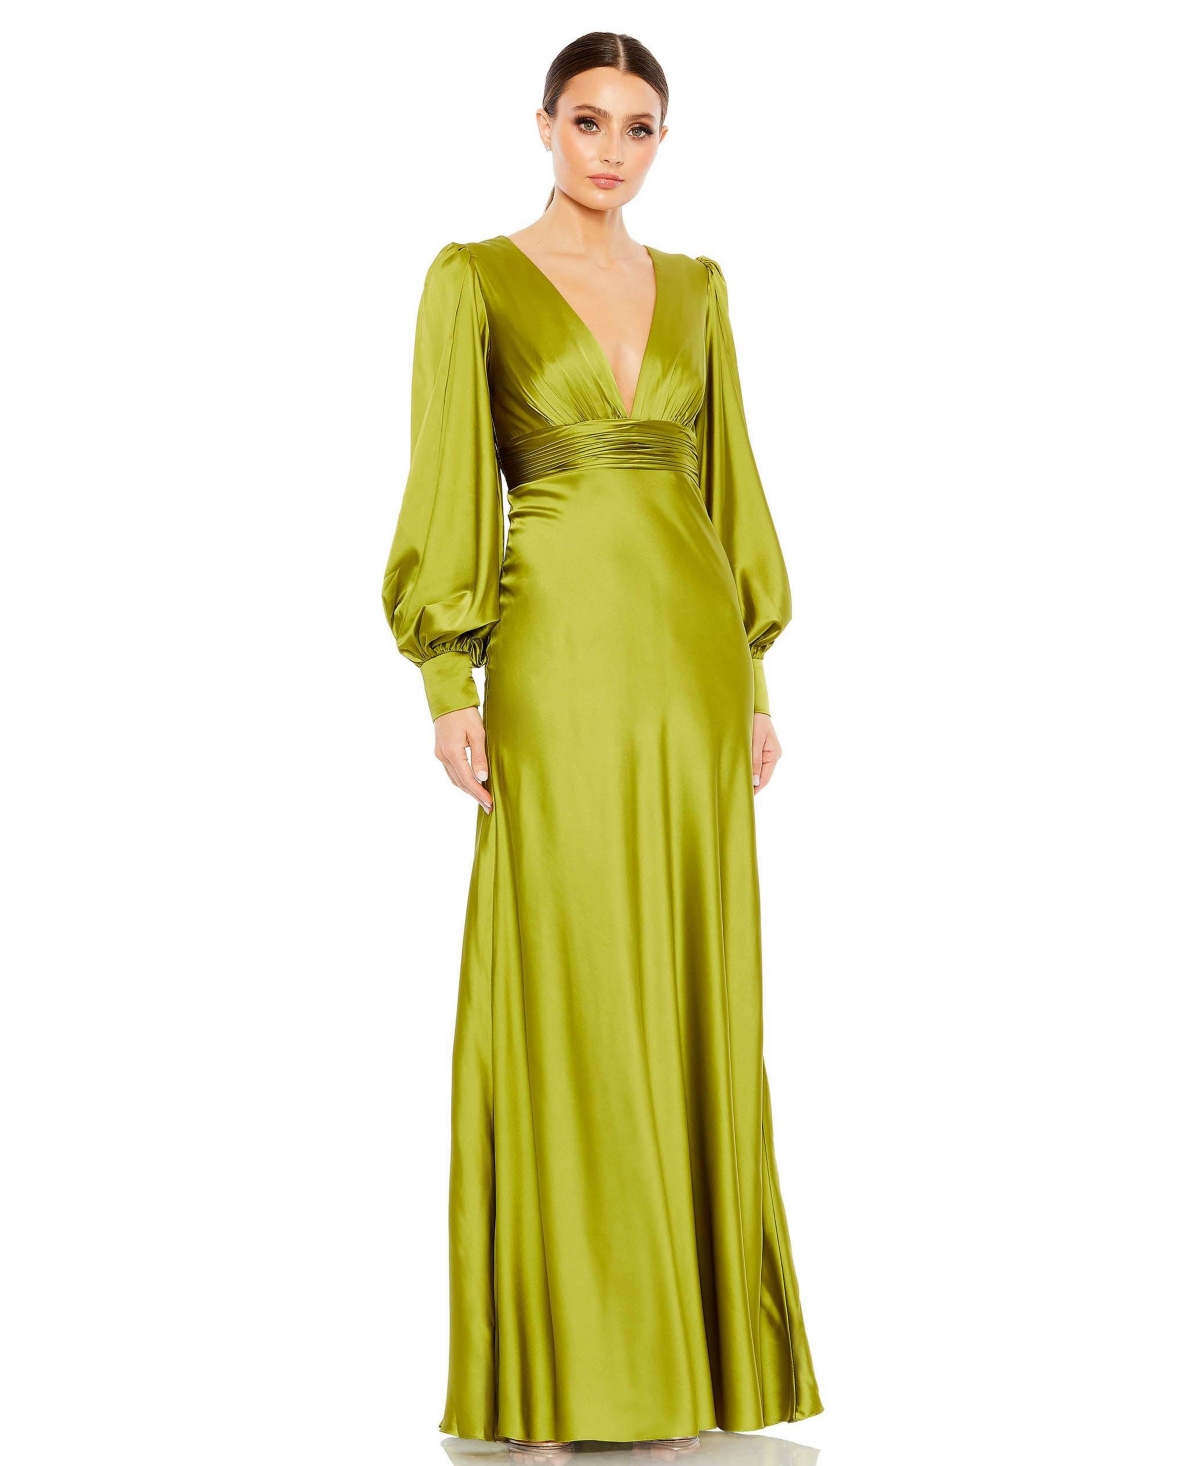 70s Clothes & 1970s Clothing, Outfits for Women Womens Ieena Charmeuse Bishop Sleeve V Neck Gown - Apple green $498.00 AT vintagedancer.com